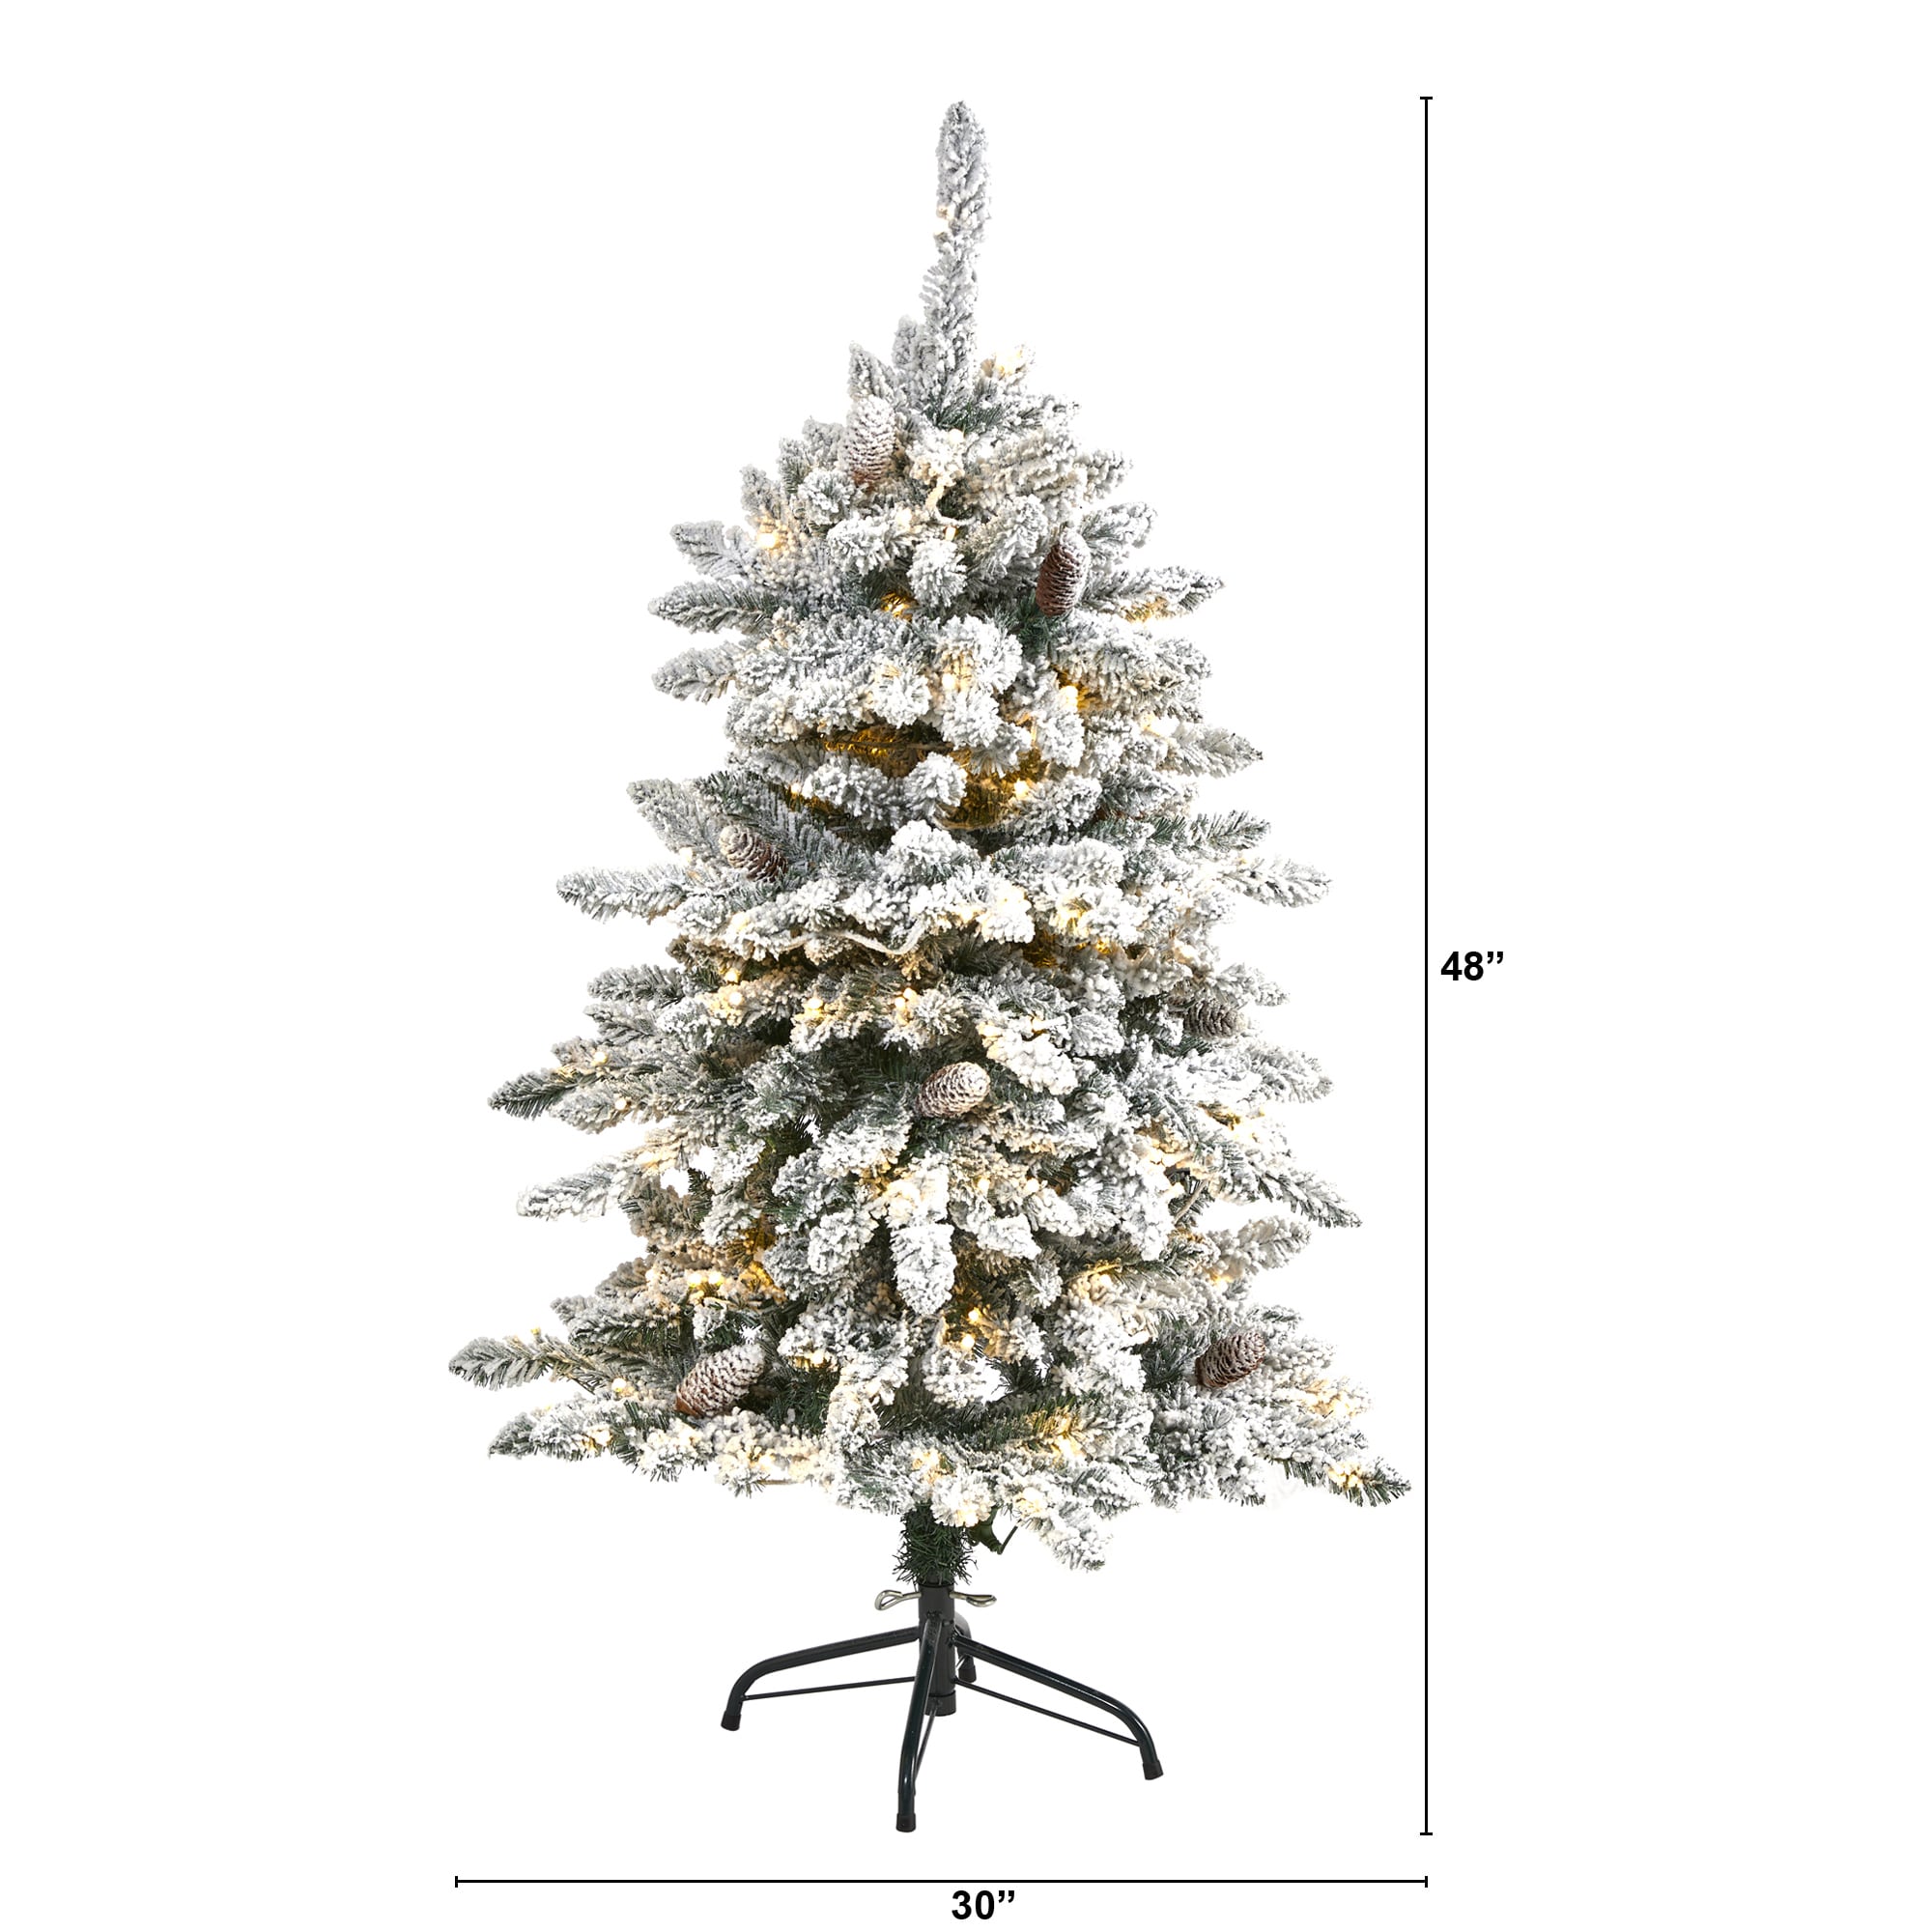 5' Pre-lit Frosted Winter Spruce Flocked Christmas Tree Decorated